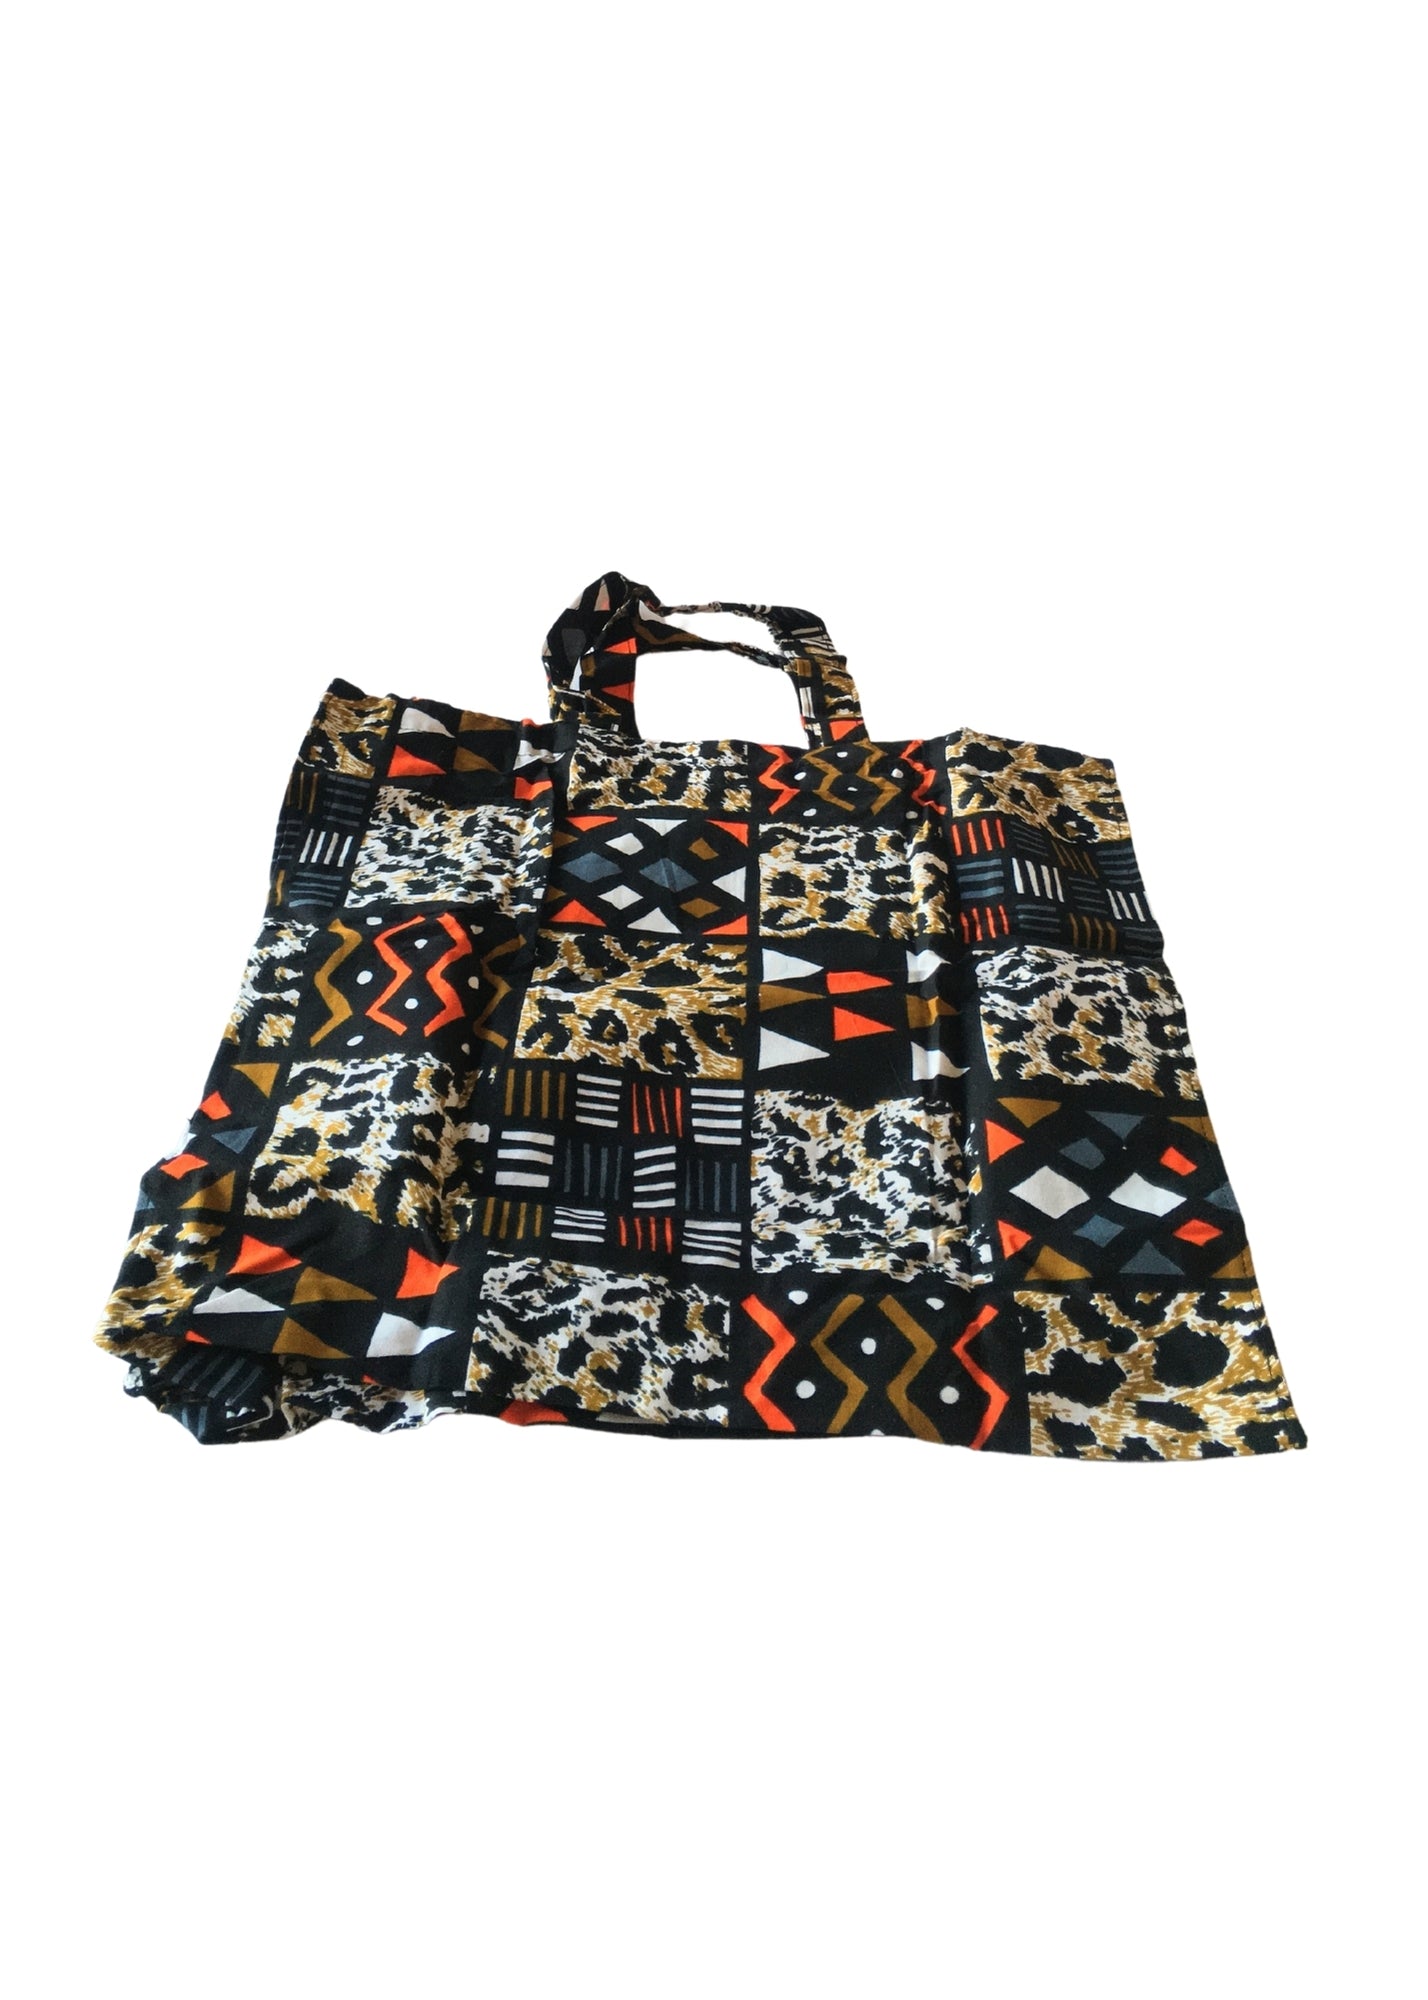 Foldable Tote Bag Multi Color -Contemporary and Colorful Ensemble-African apparel and accessories